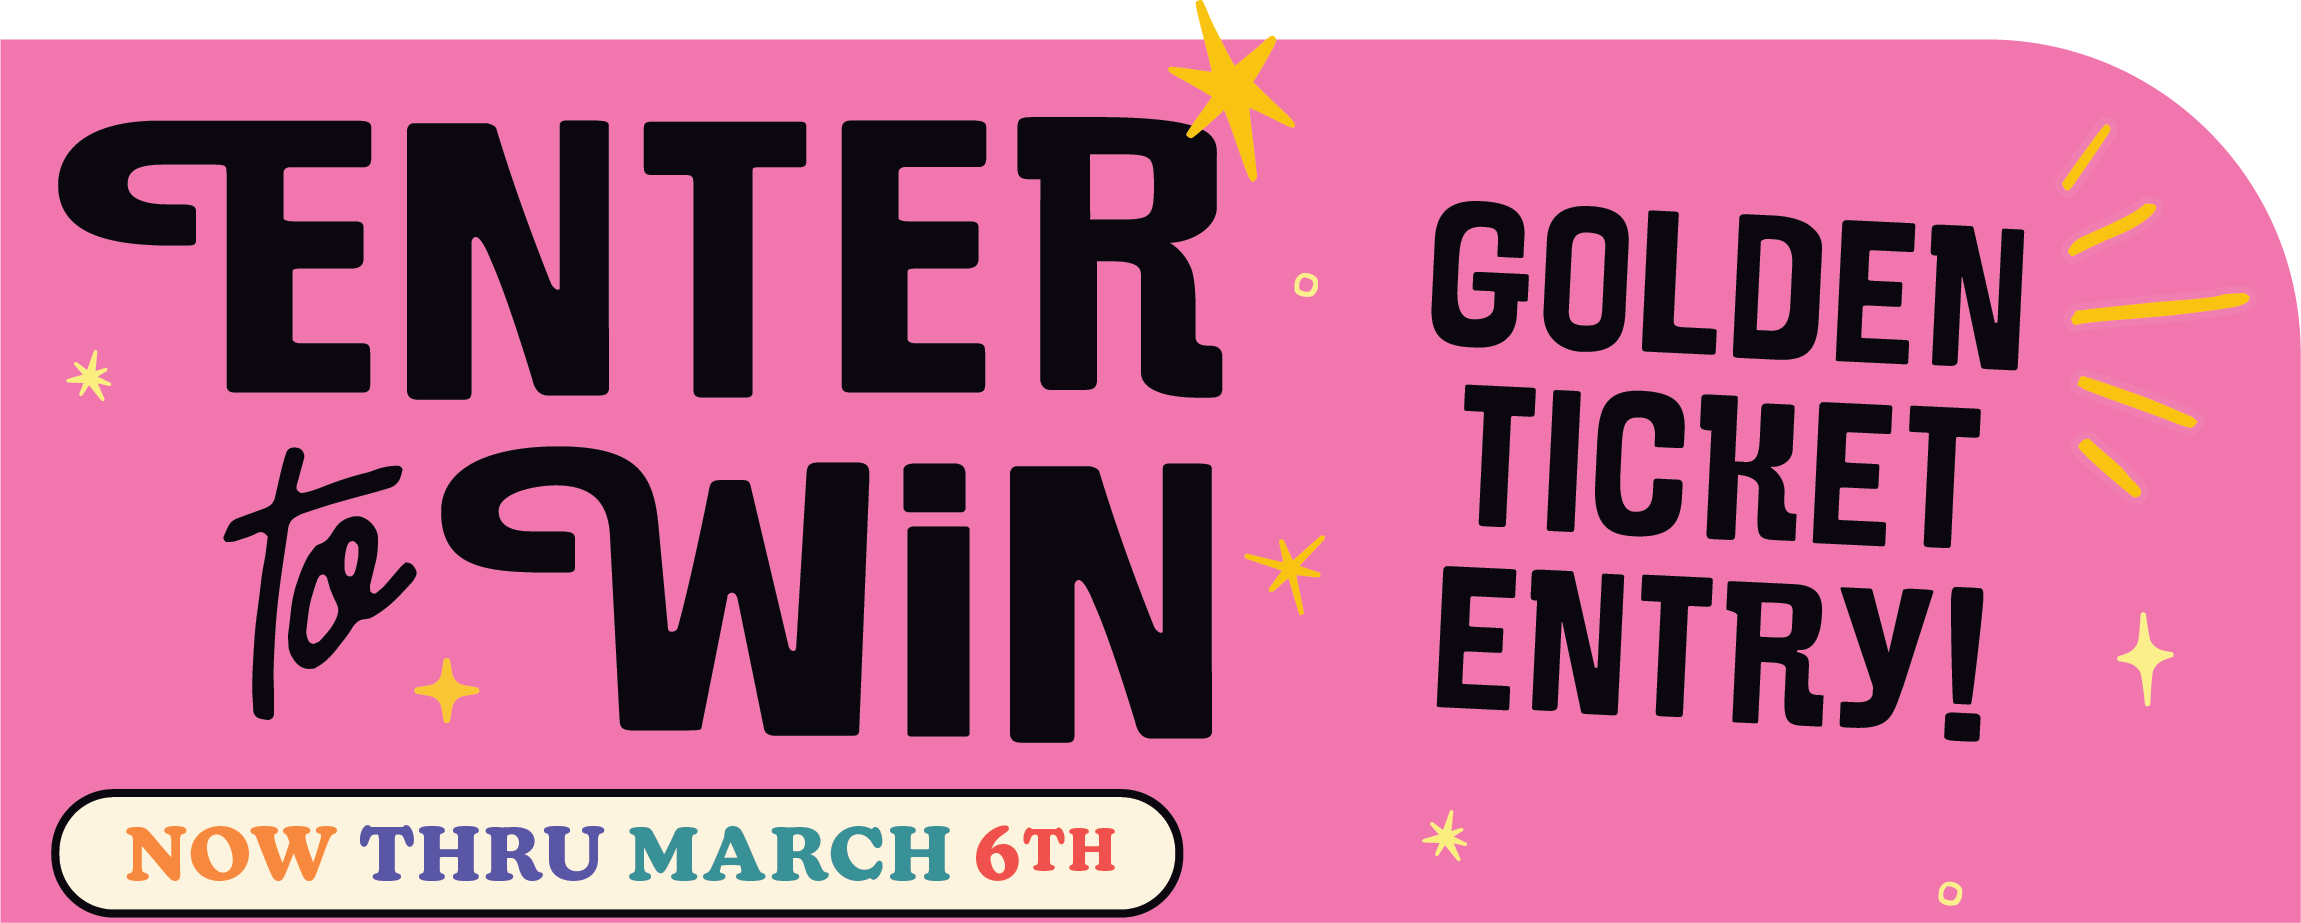 Text showing enter to win, golden ticket entry, now thru March 15th